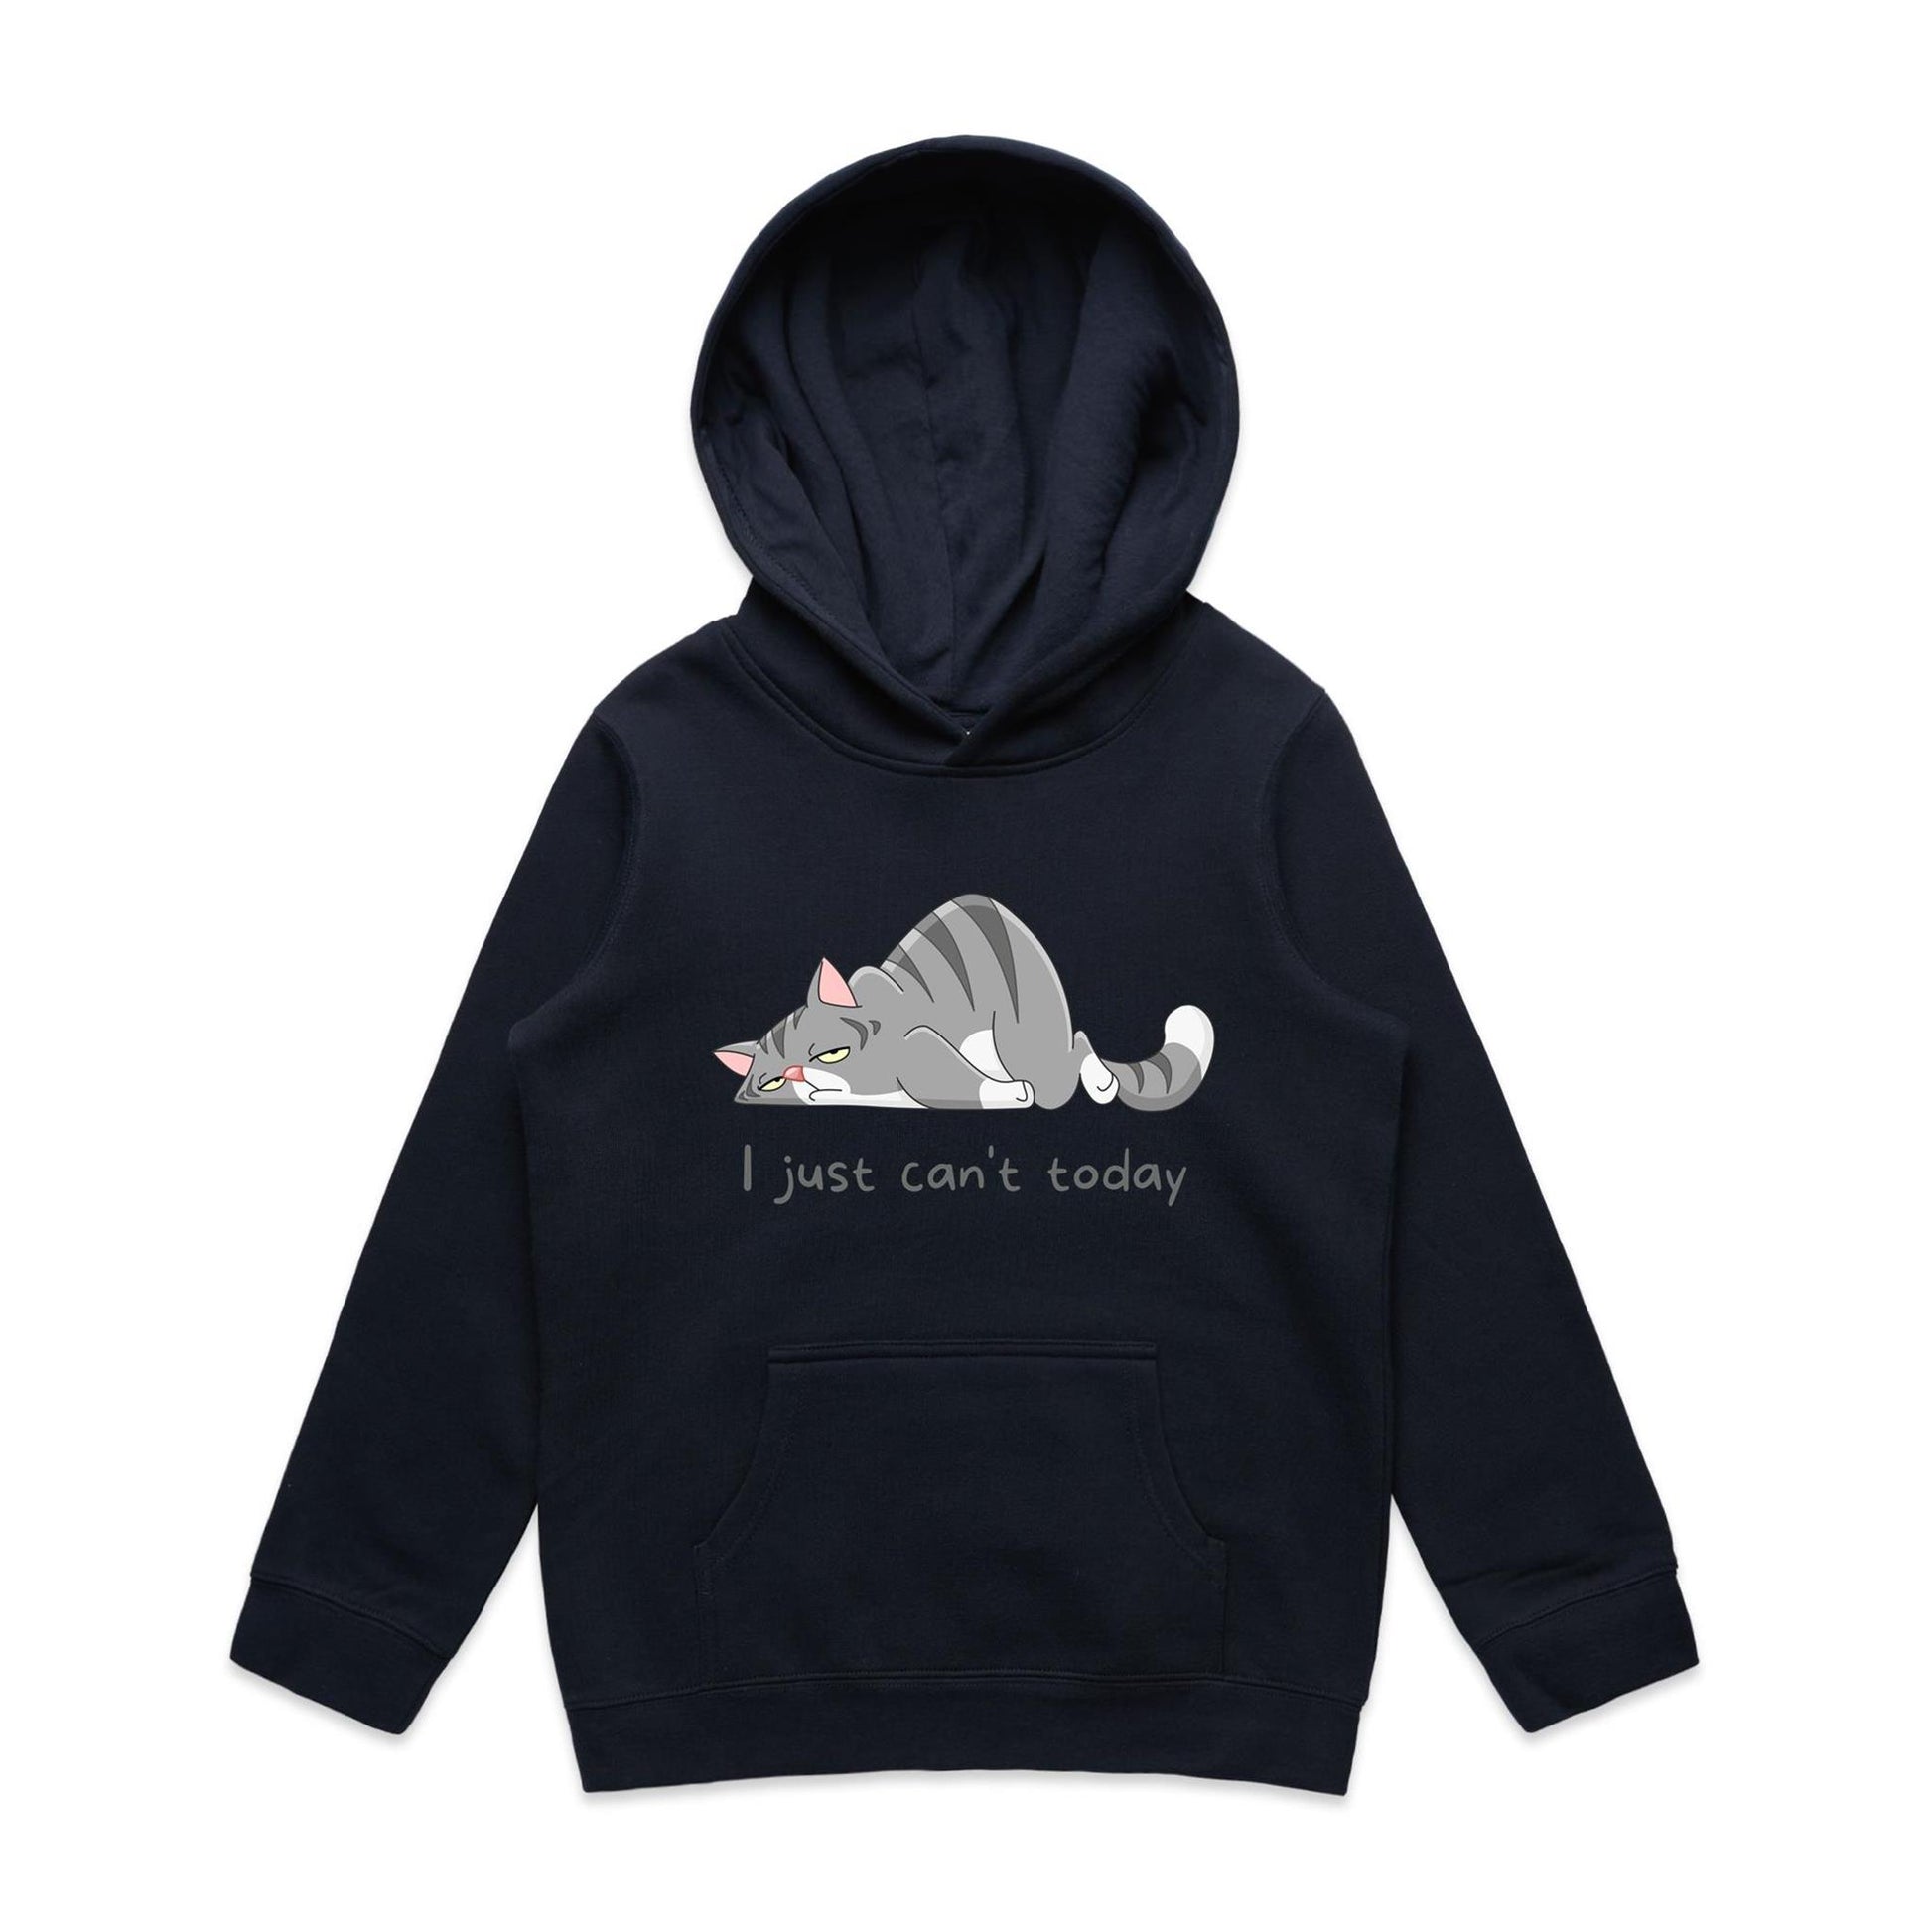 Cat, I Just Can't Today - Youth Supply Hood Navy Kids Hoodie animal